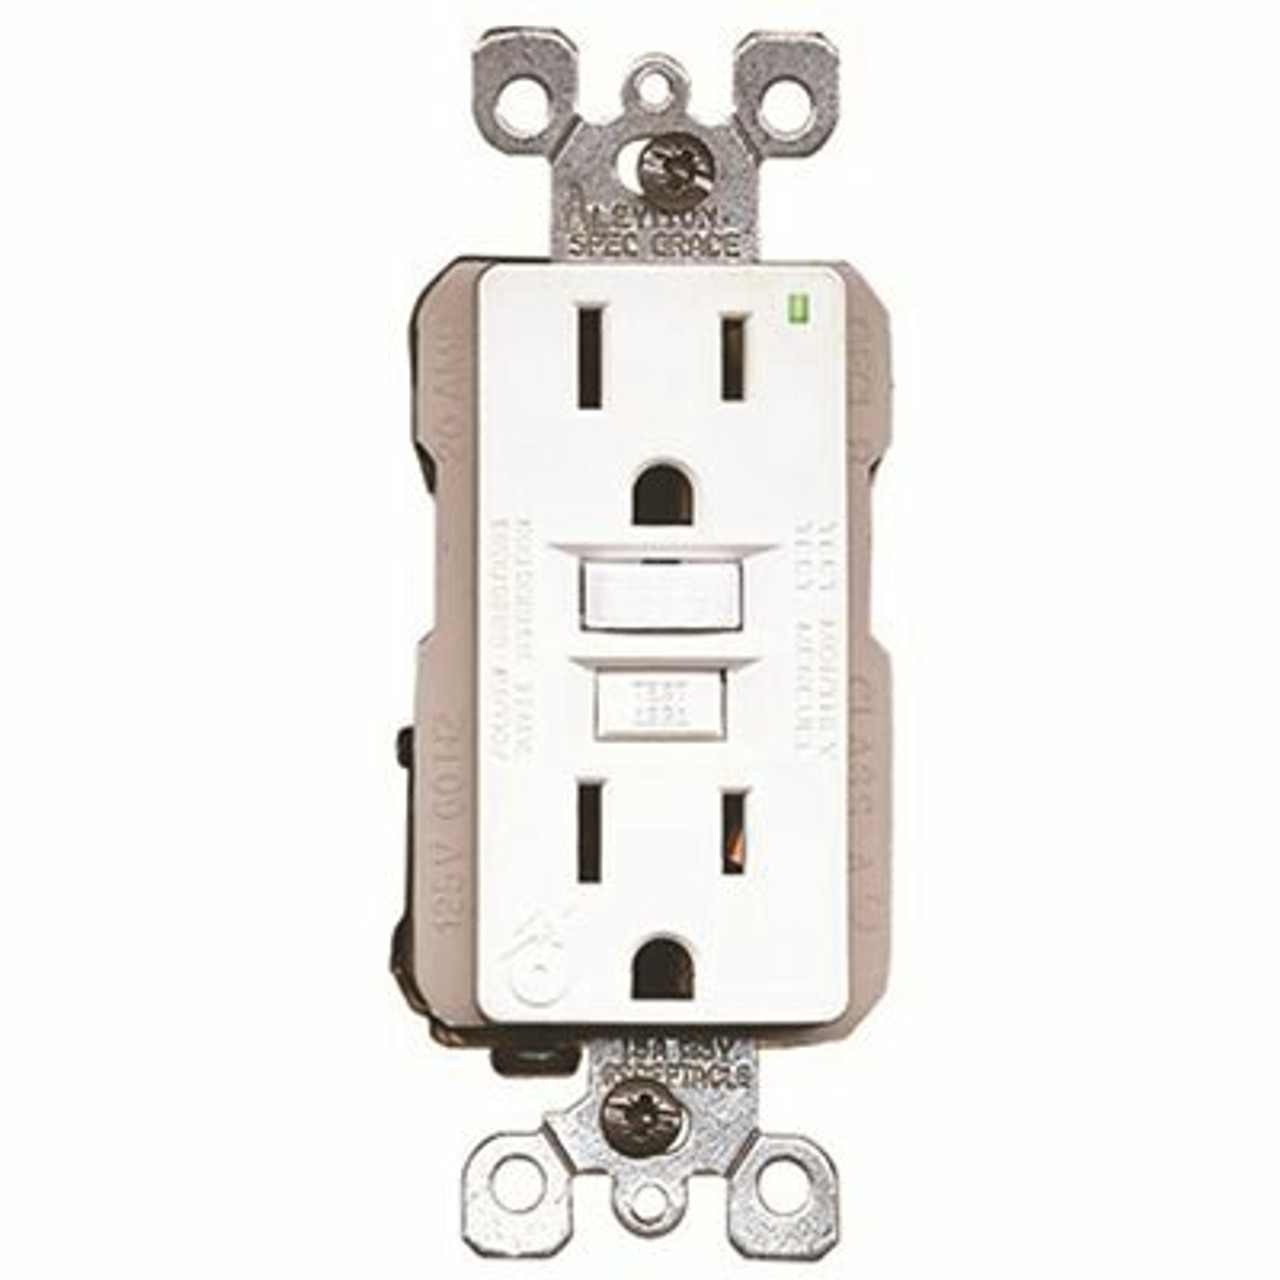 KIT ORDERS ONLY - NOT FOR INDIVIDUAL SALE - Leviton 15 Amp 125-Volt NEMA 5-15R SmartlockPro 2-Pole Residential Grade Duplex GFCI Receptacle with LED, White